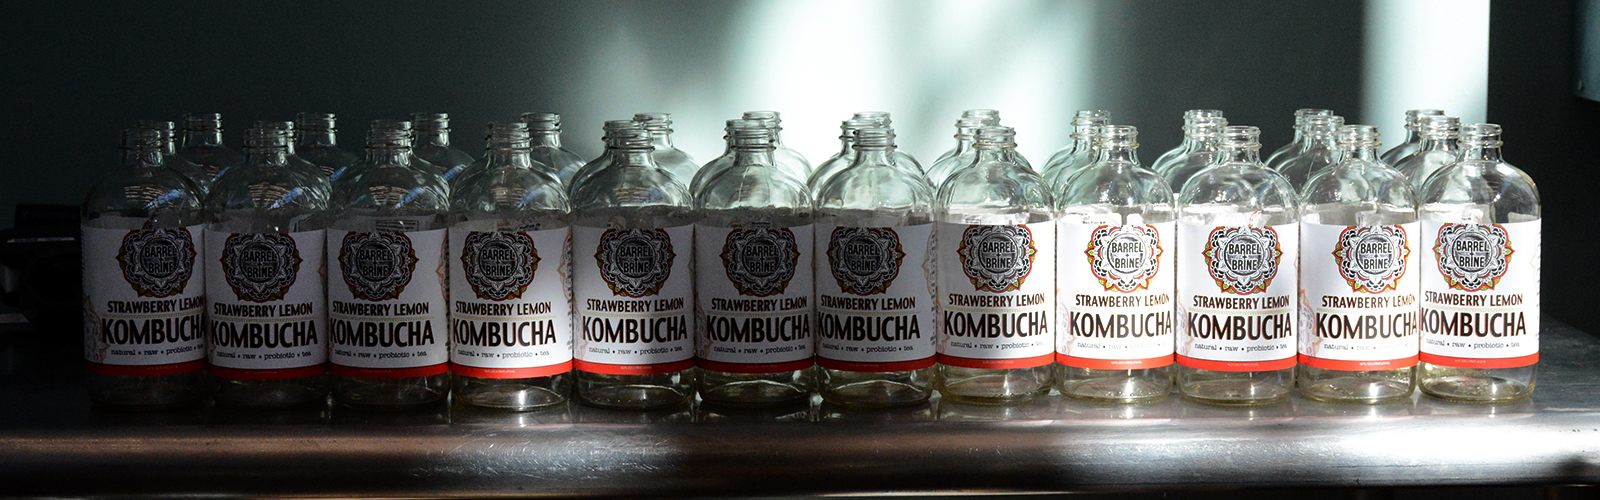 Bottles waiting to be filled with strawberry lemon kombucha at Barrel + Brine, 155 Chandler St., Suite # 3, Buffalo, N.Y.